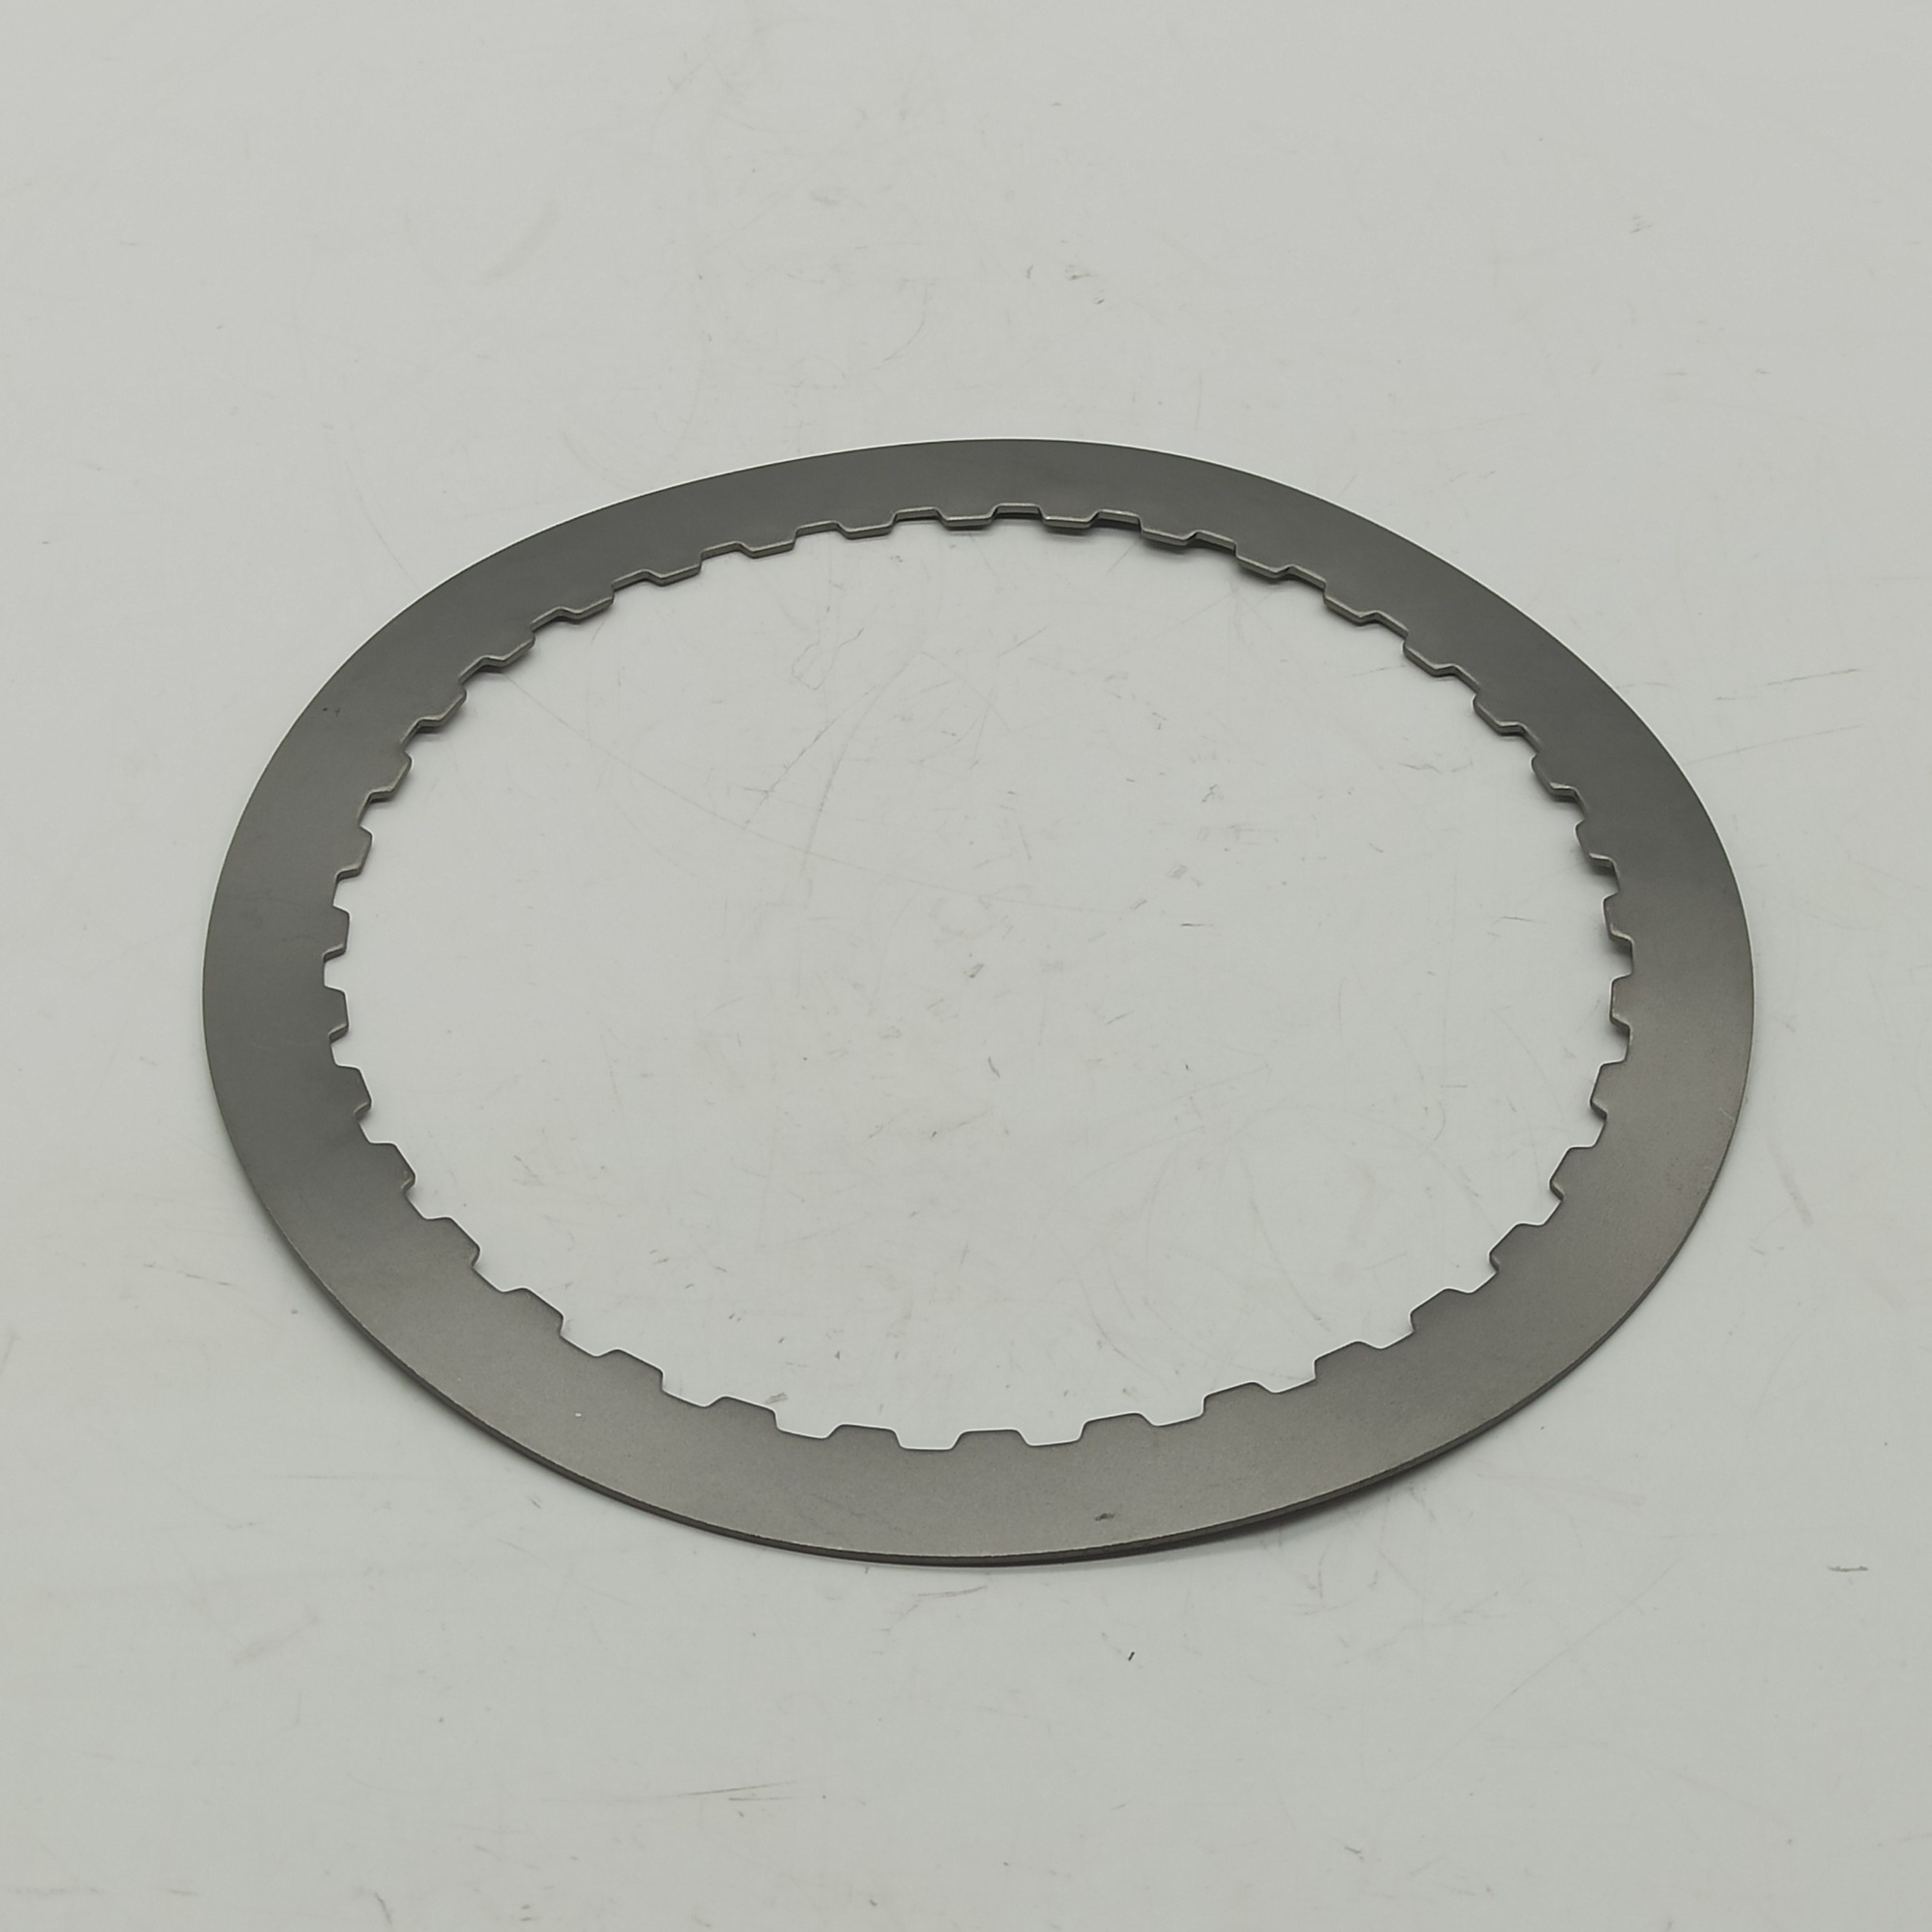 6T70-0001-OEM 6T70 3-5 /Reverse AT Clutch Wave Plate ACDelco GM Original Equipment 24254103